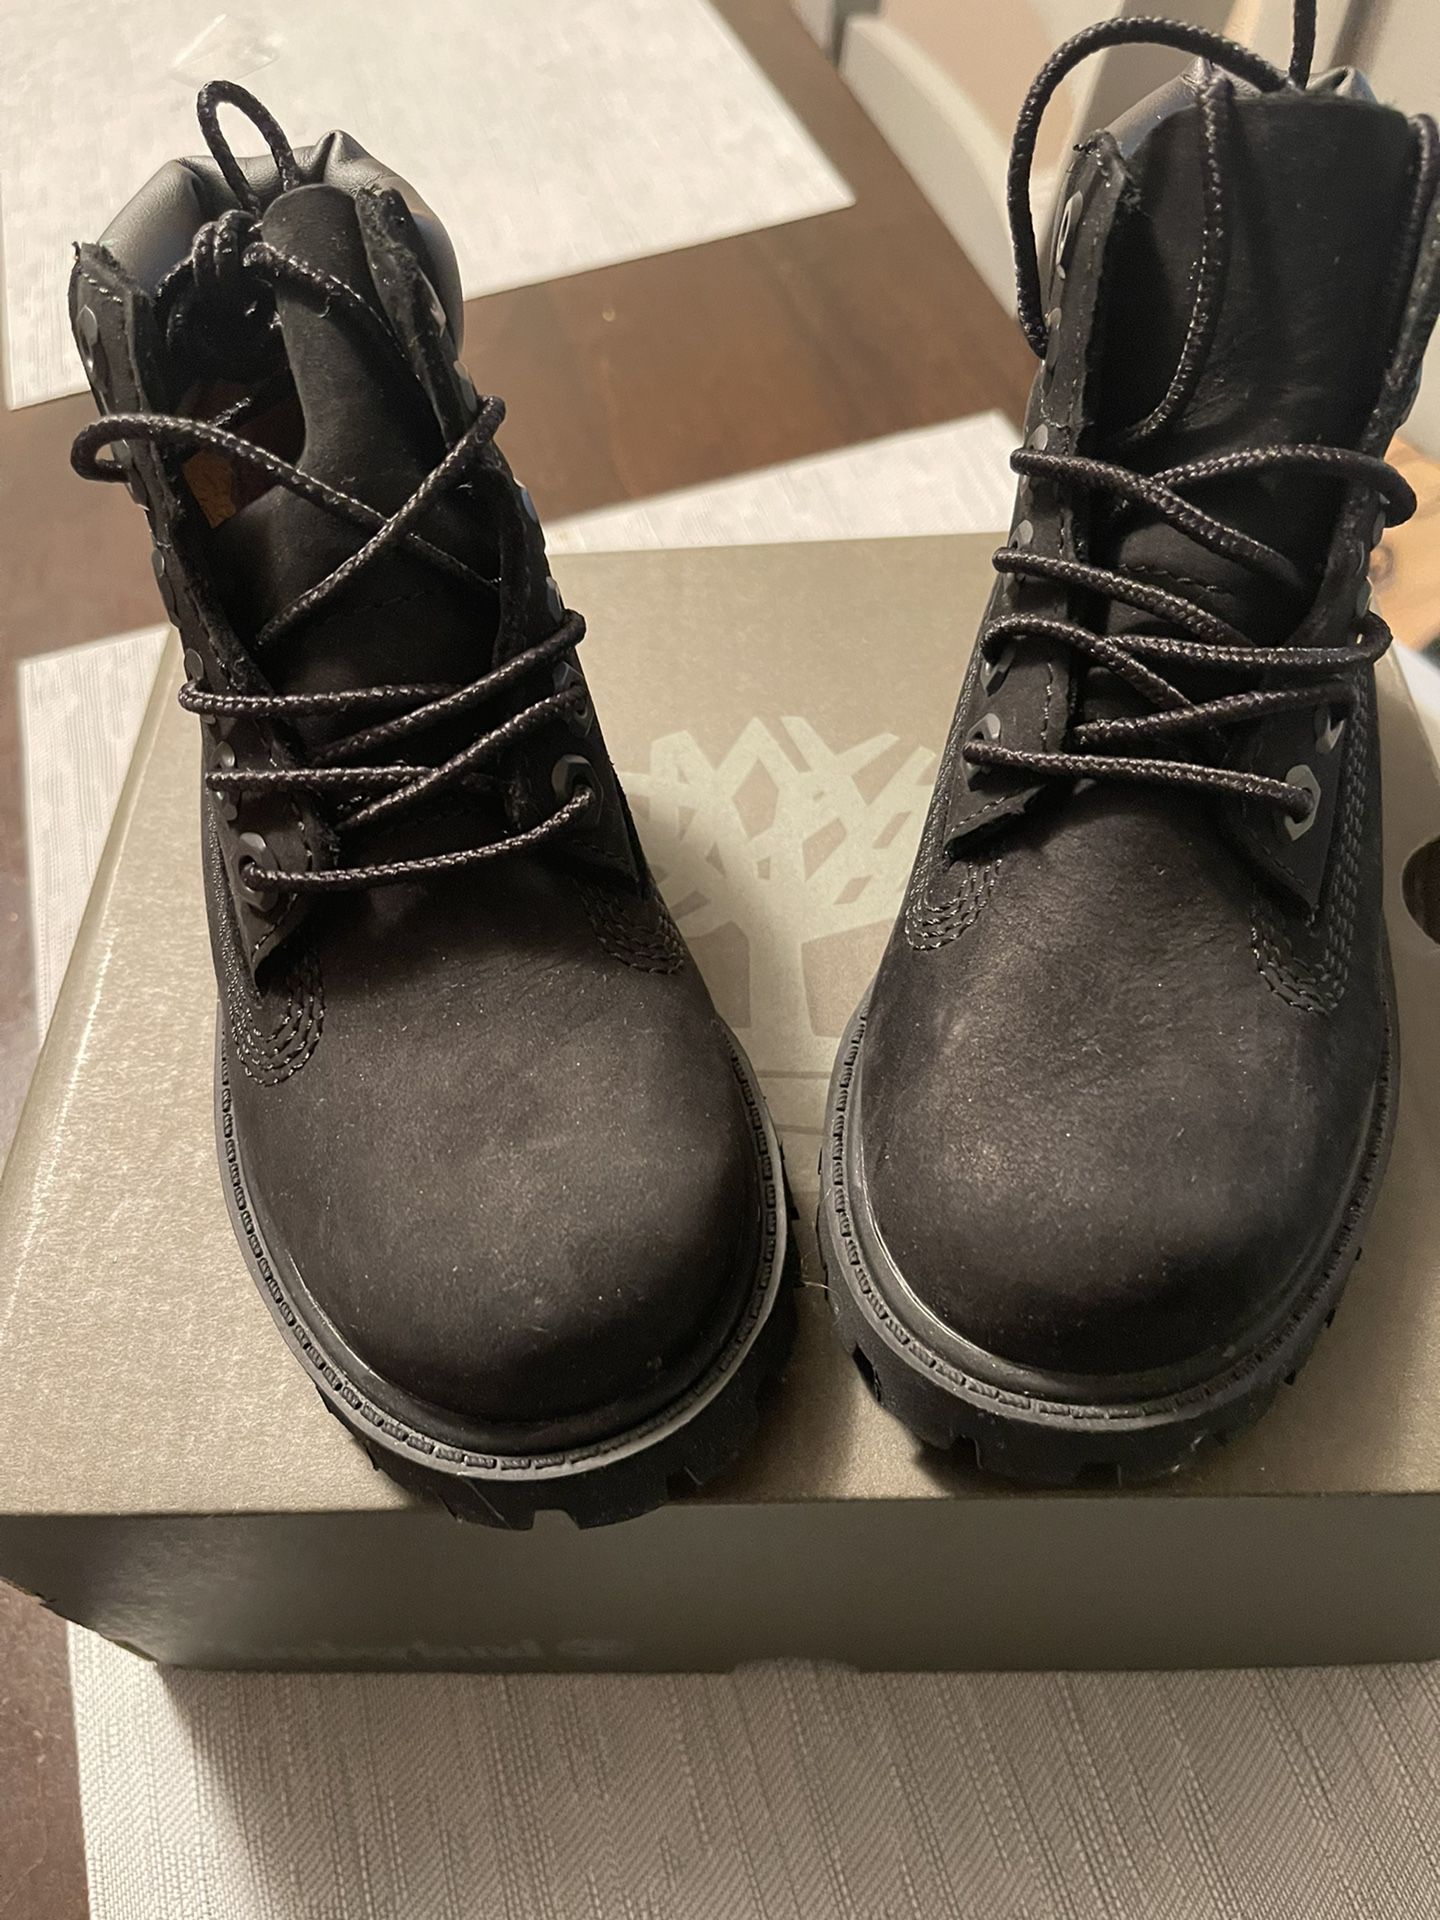 Optimista Explícito Novio Black Timberland Boots for Sale in Yonkers, NY - OfferUp